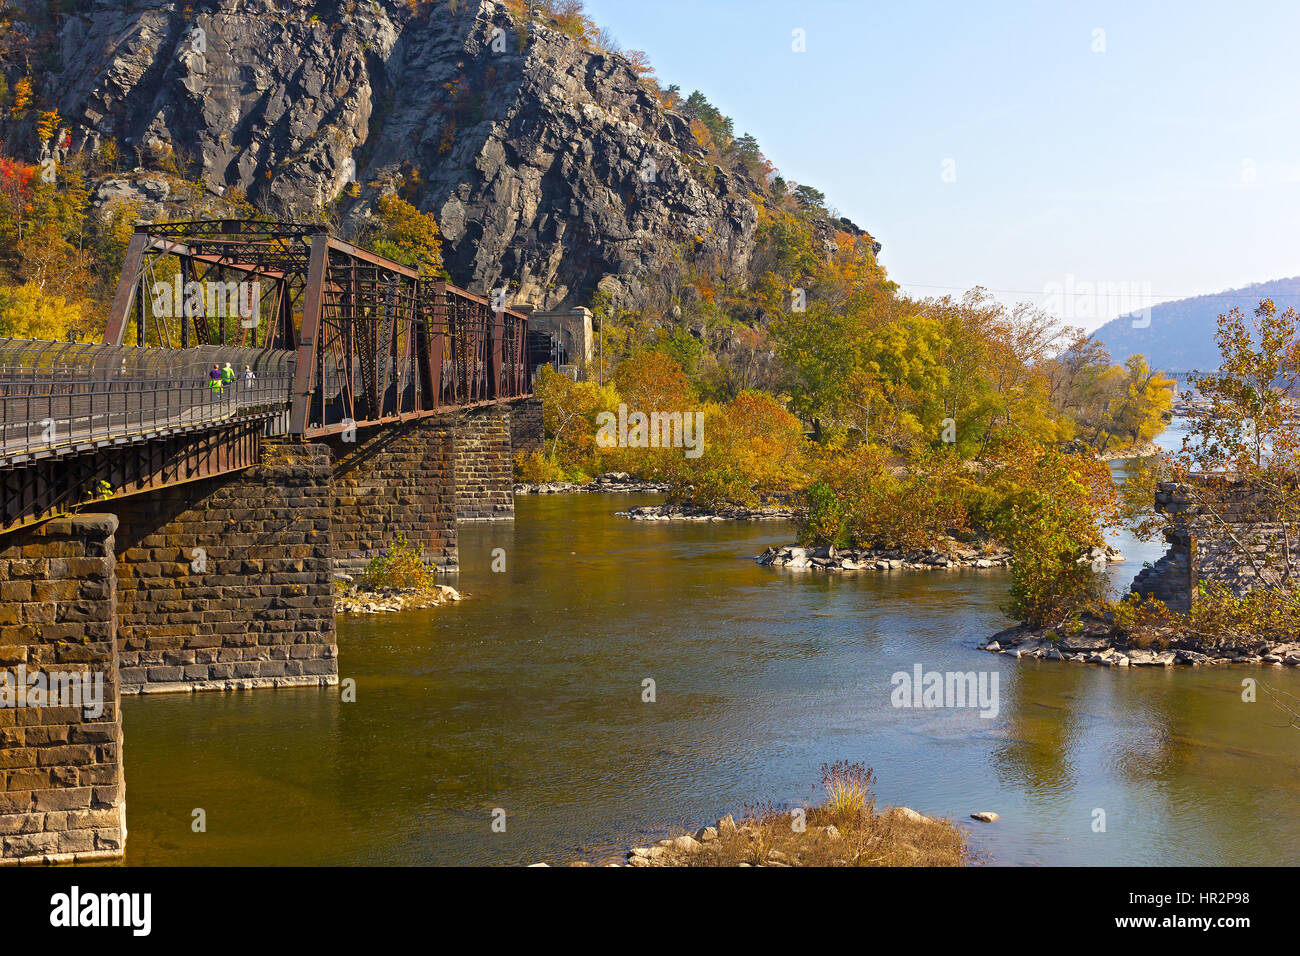 Appalachian trail crossing Shenandoah River in Harpers Ferry. Colorful autumn landscape from a scenic outlook in West Virginia, USA. Stock Photo